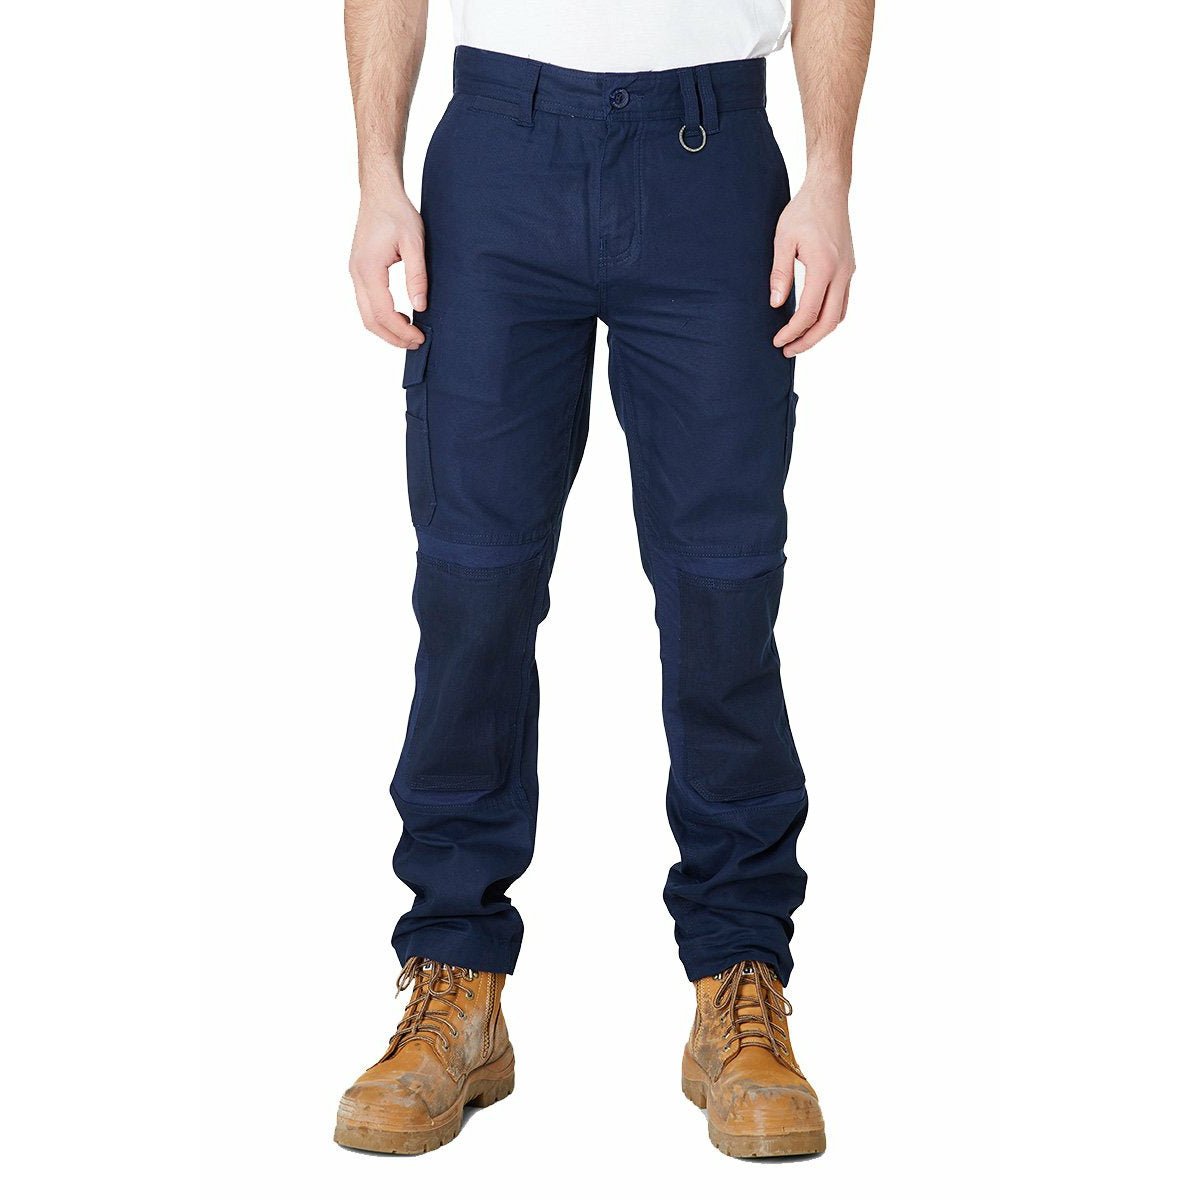 Working Trouser at Best Price in India